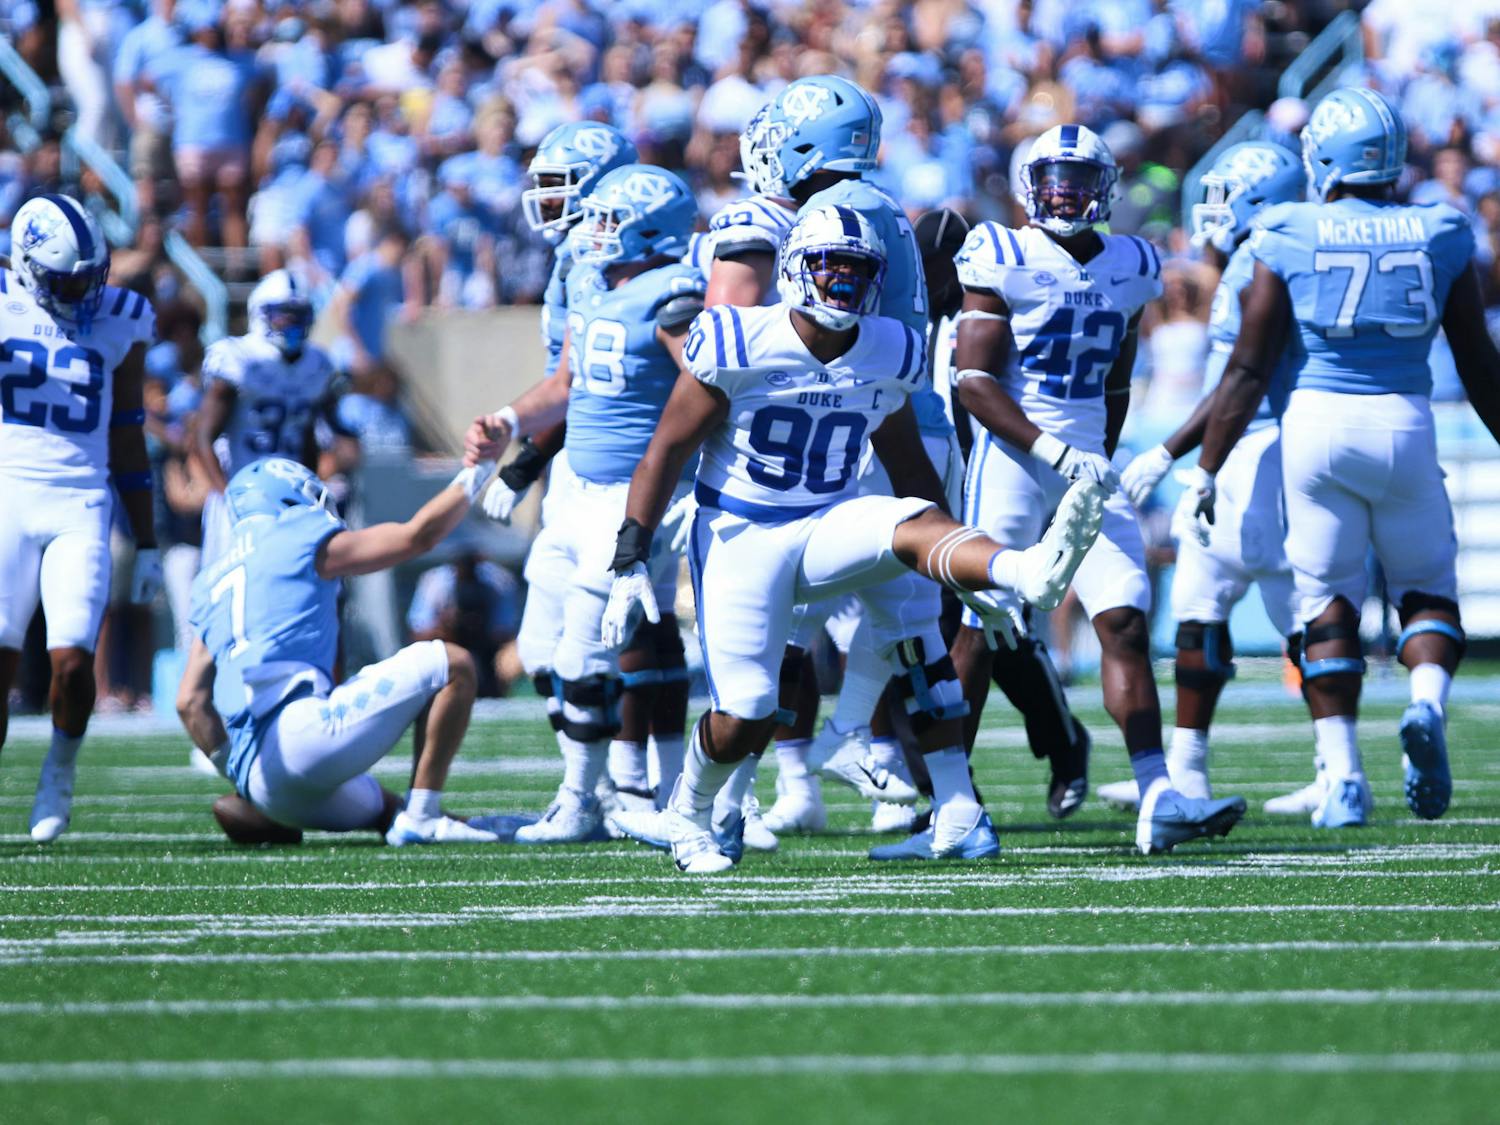 Despite DeWayne Carter and the Blue Devil defense recording five sacks, the North Carolina offense could not be kept in check for too long.